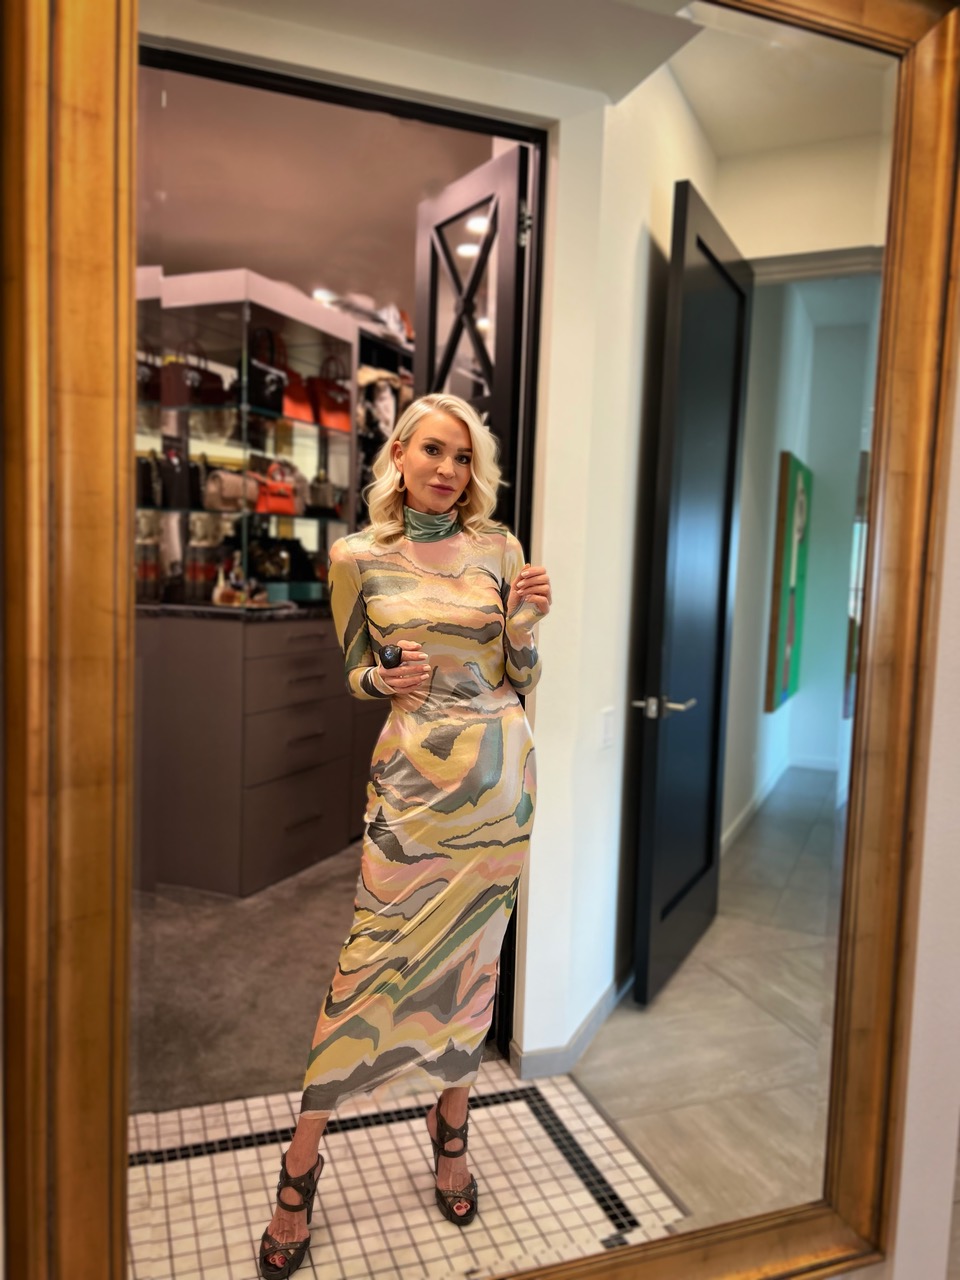 Lifestyle Influencer, Jamie Lewinger of More Than Turquoise wearing the Shailene Metallic Dress from AFRM in Soft Linear Abstract 